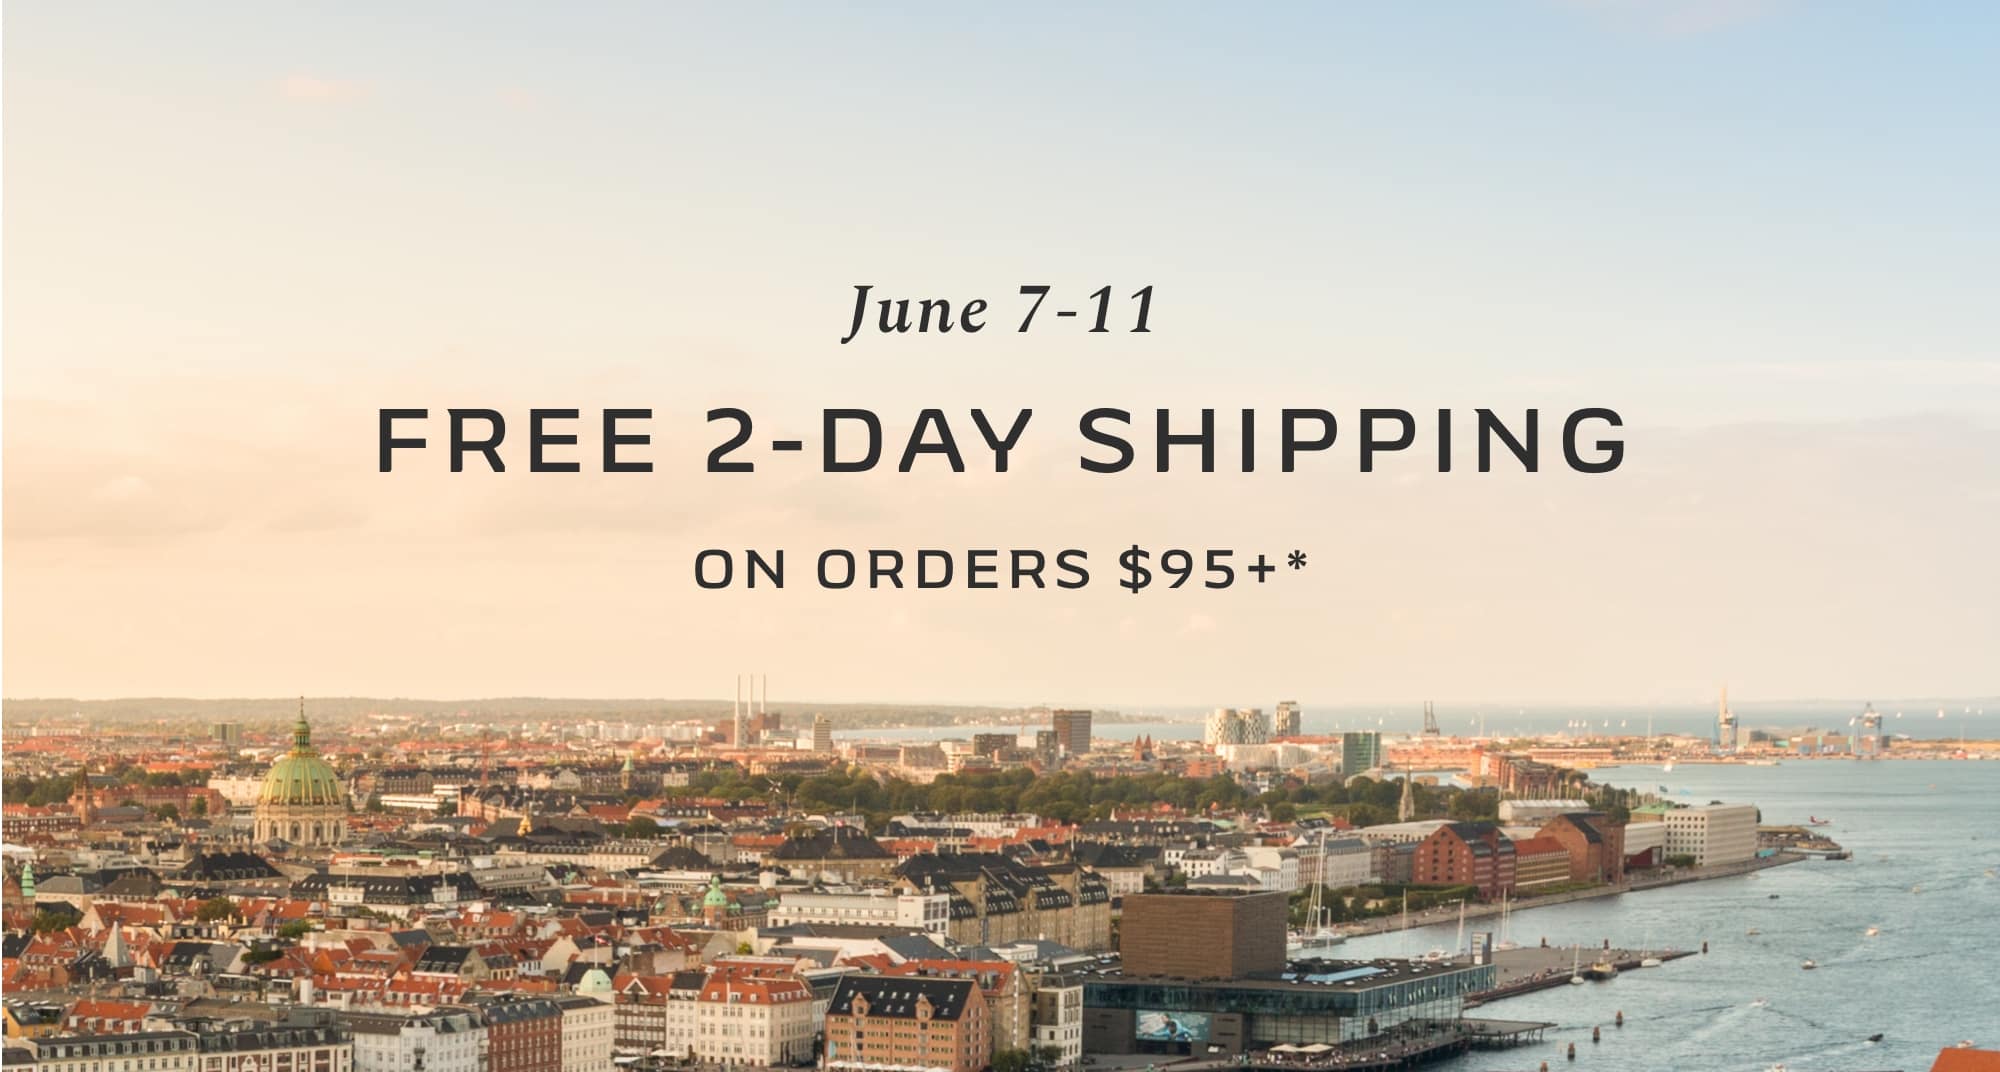 FREE 2-DAY SHIPPING ON $95+ ORDERS